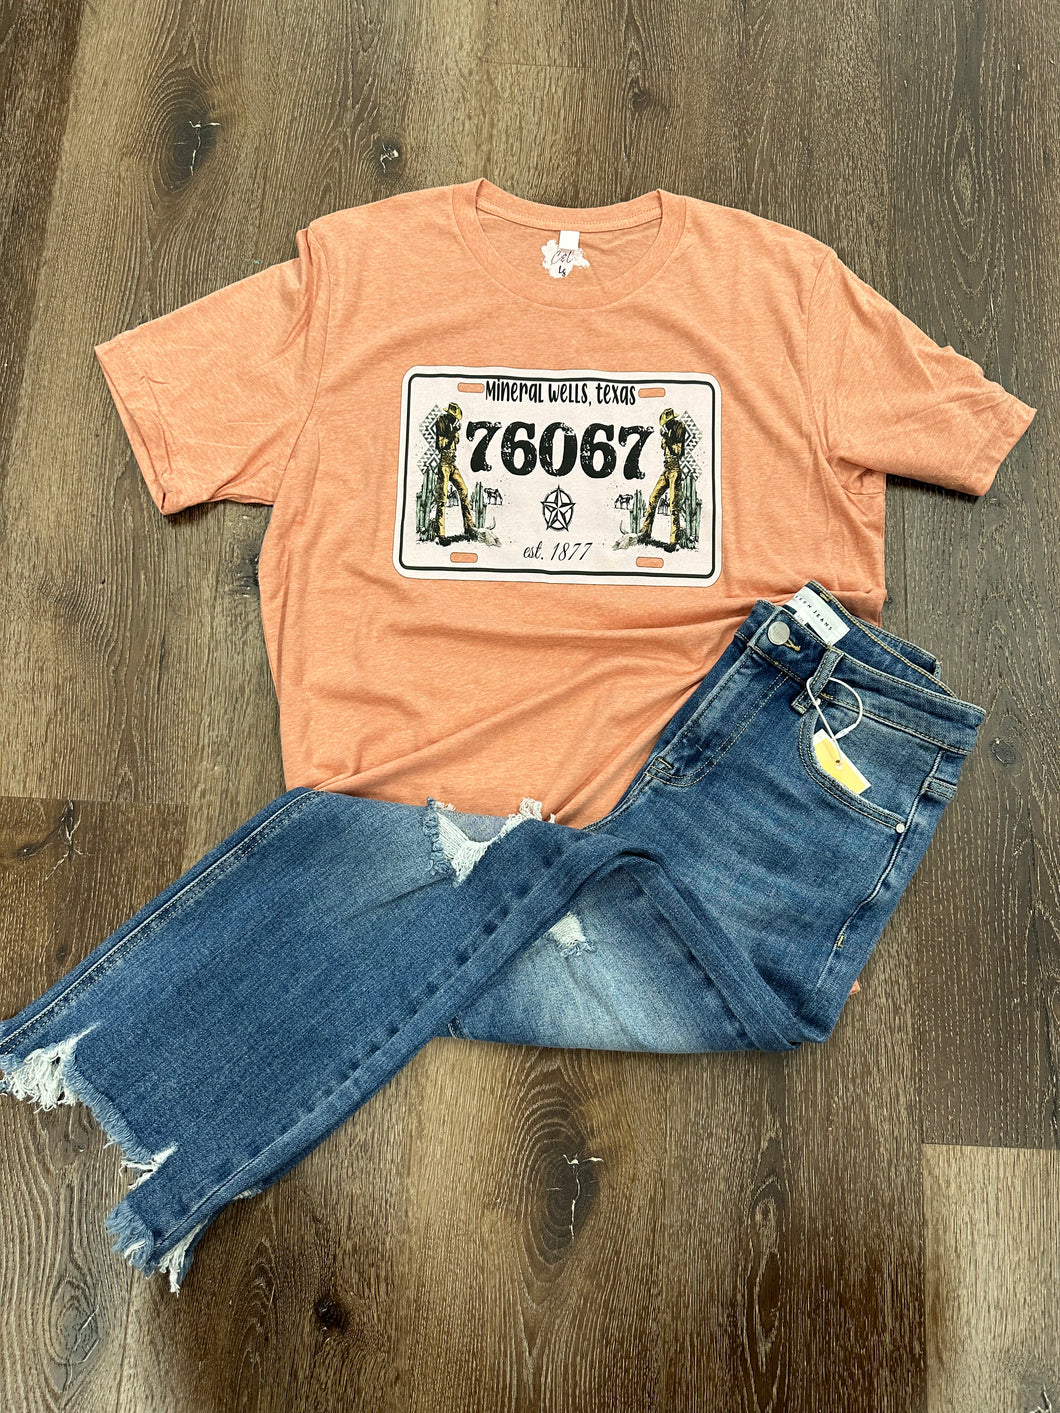 License Plate Graphic Tee - YOU CAN CUSTOMIZE IT